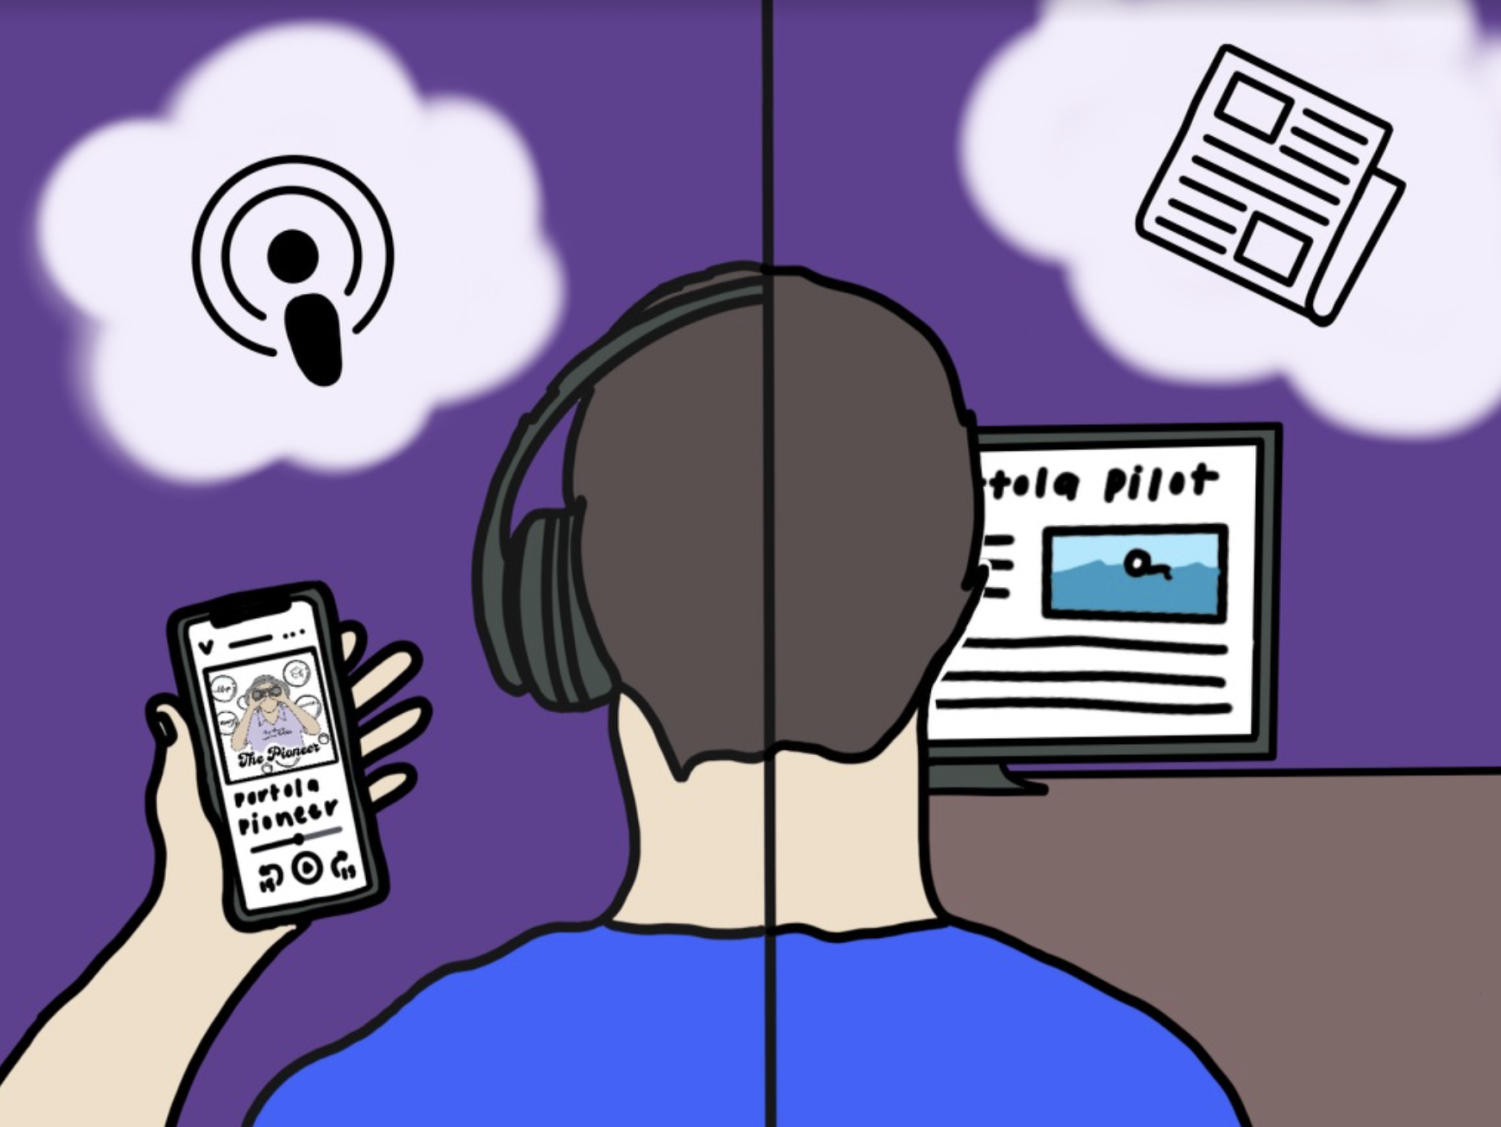 Those in favor of tuning into podcasts enjoy the flexibility and productivity offered by the more immersive medium, while fans of articles argue they can gain a deeper understanding in a shorter period of time.